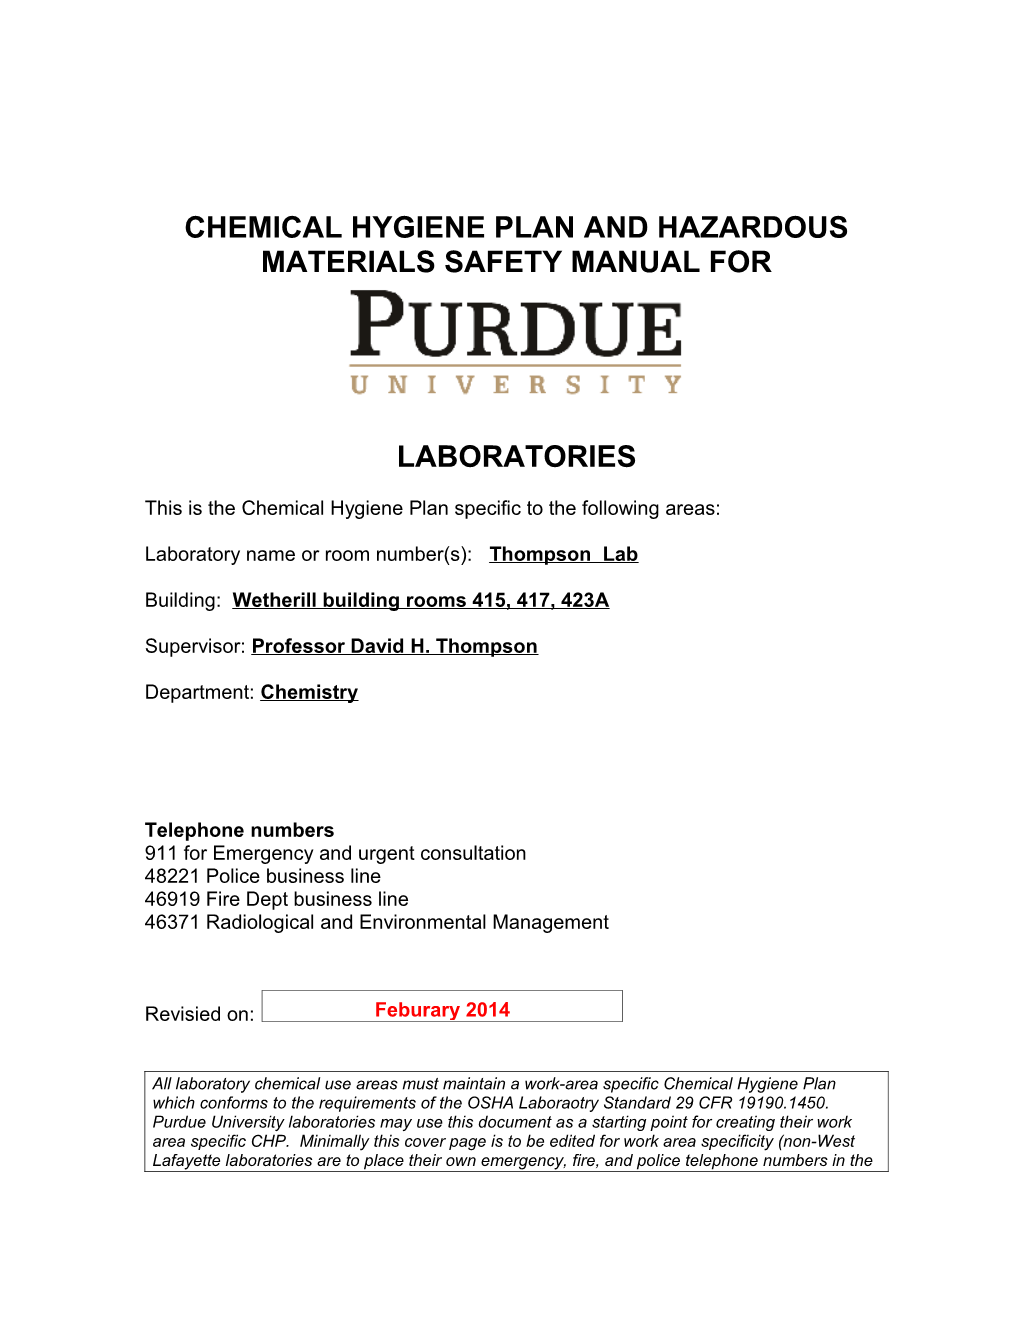 This Is the Chemical Hygiene Plan Specific to the Following Areas